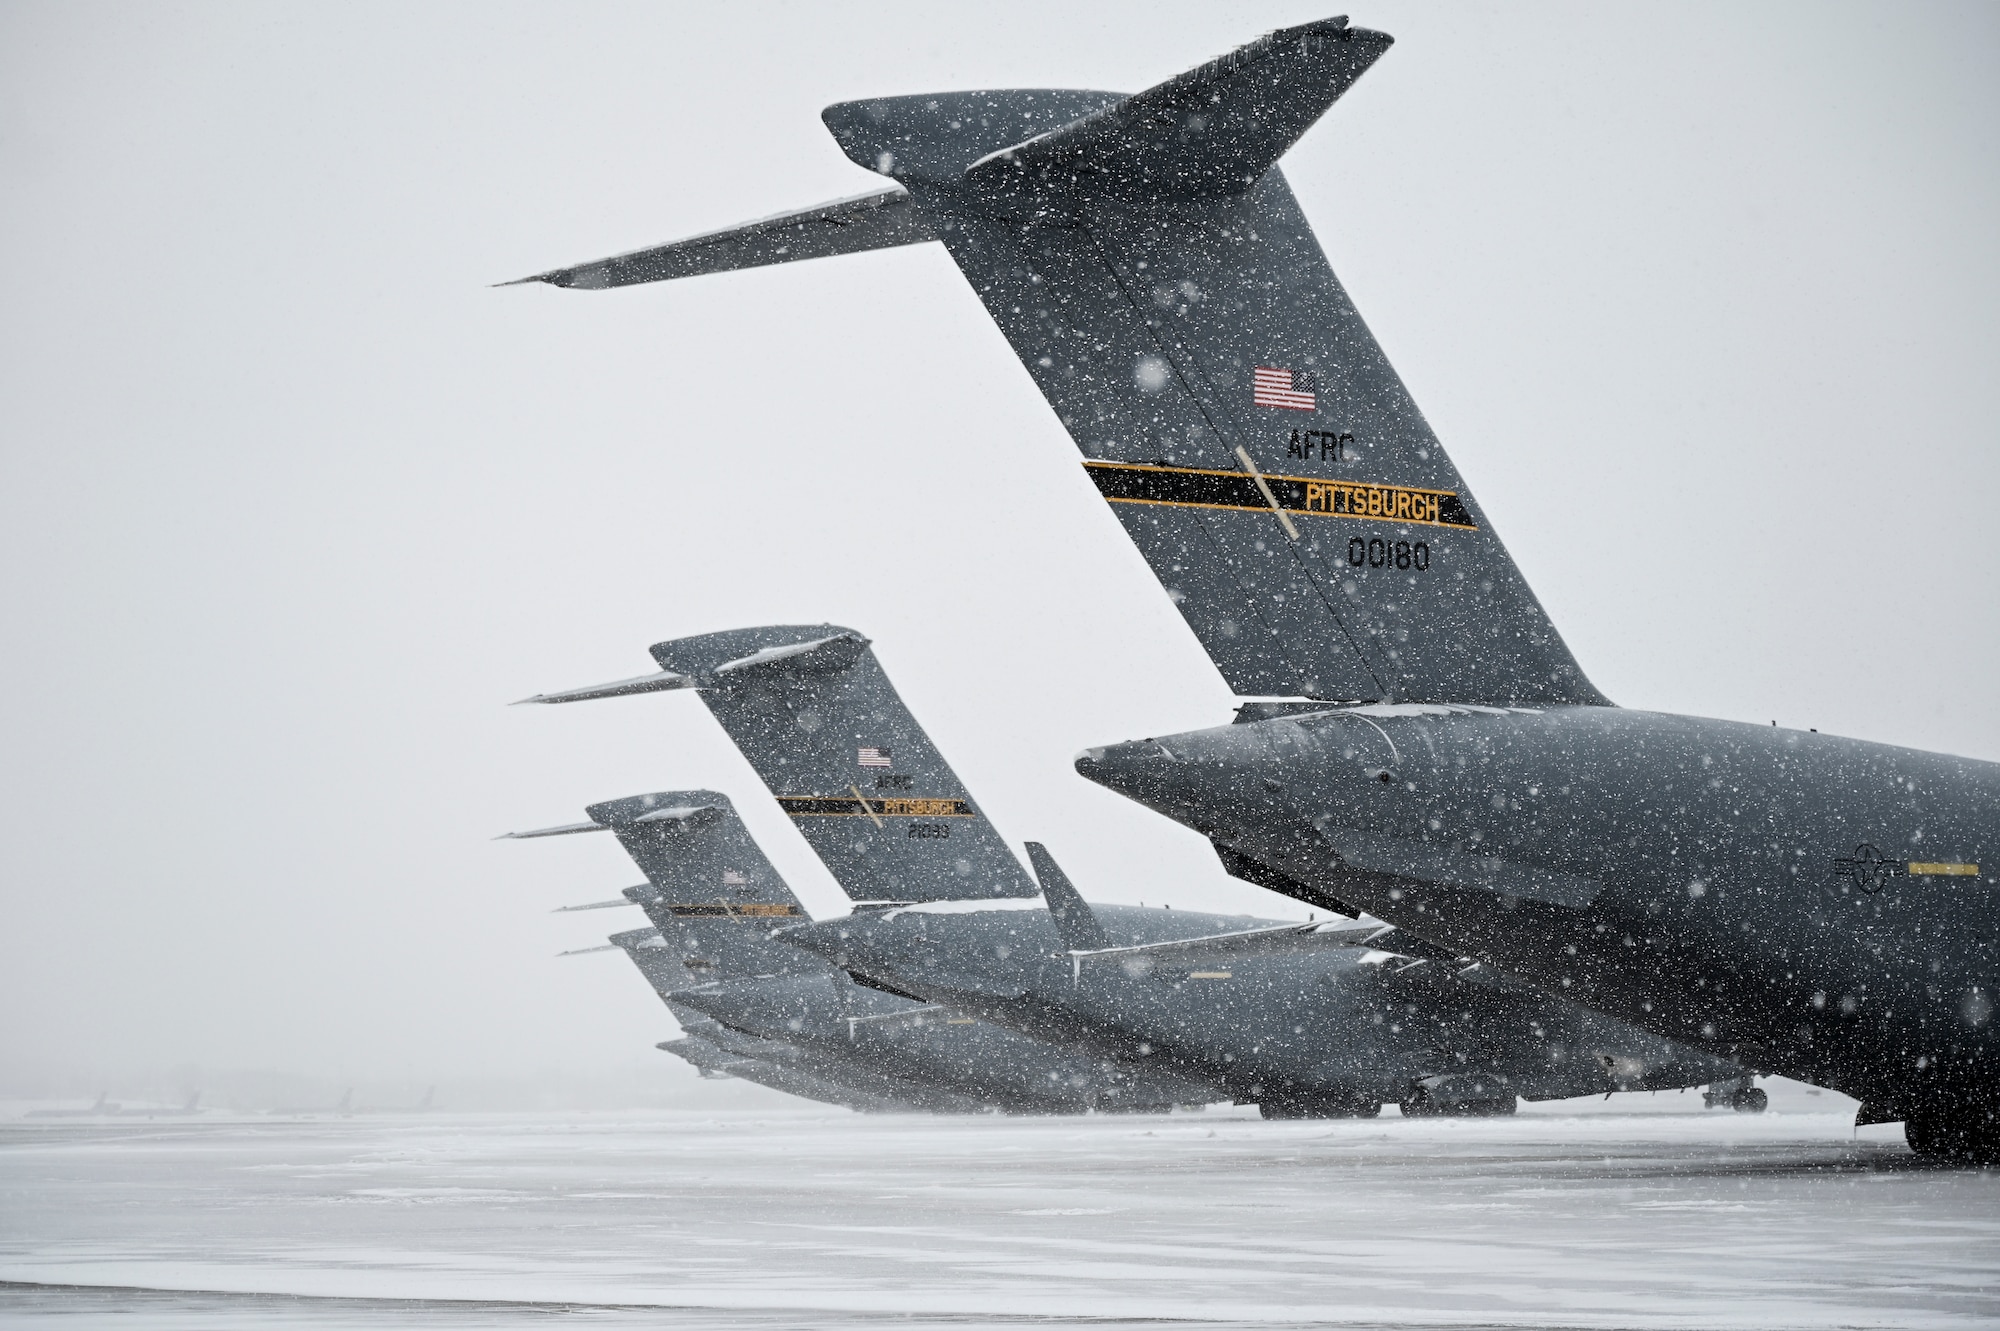 C-17 Globemaster III aircraft assigned to the 911th Airlift Wing sit on the flight line at the Pittsburgh International Airport Air Reserve Station, Pennsylvania, Feb. 16, 2021.